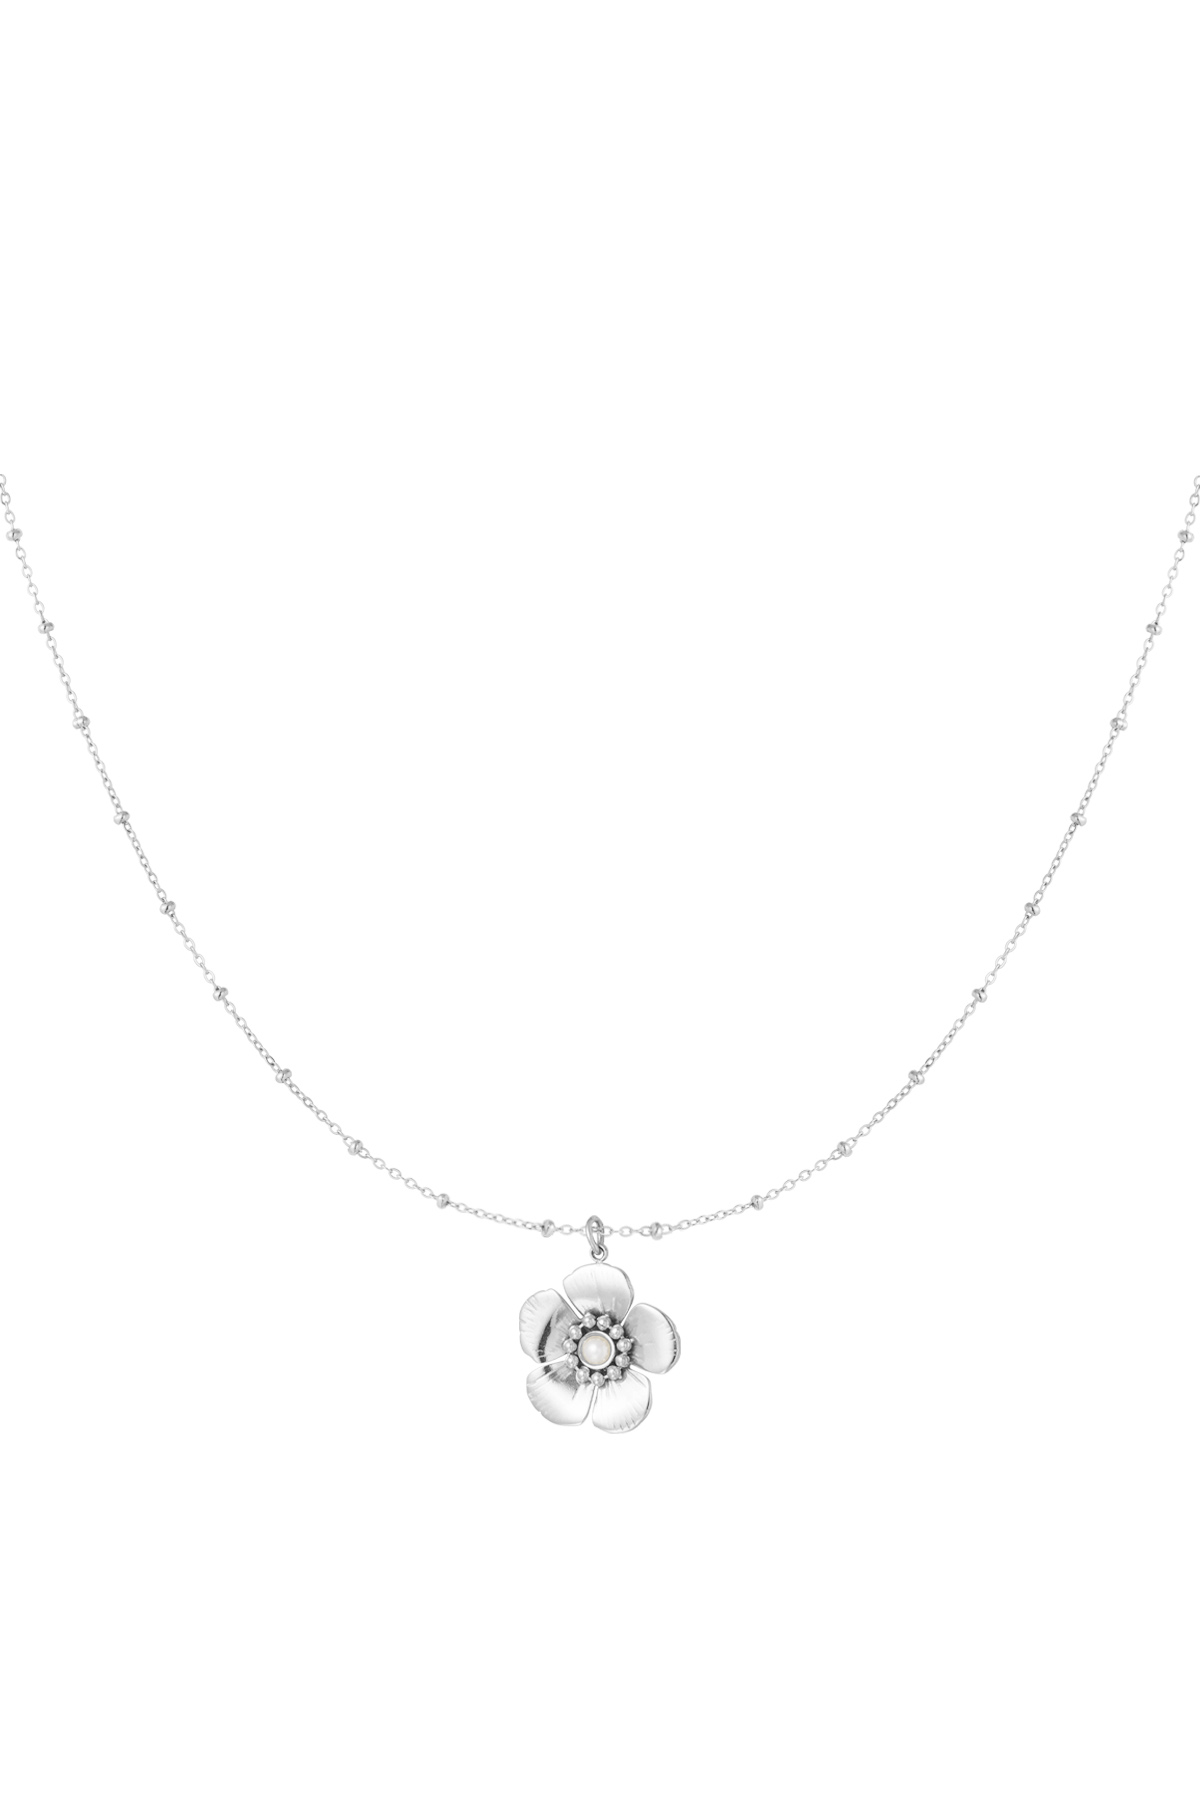 Ball necklace with flower pendant and pearl - silver